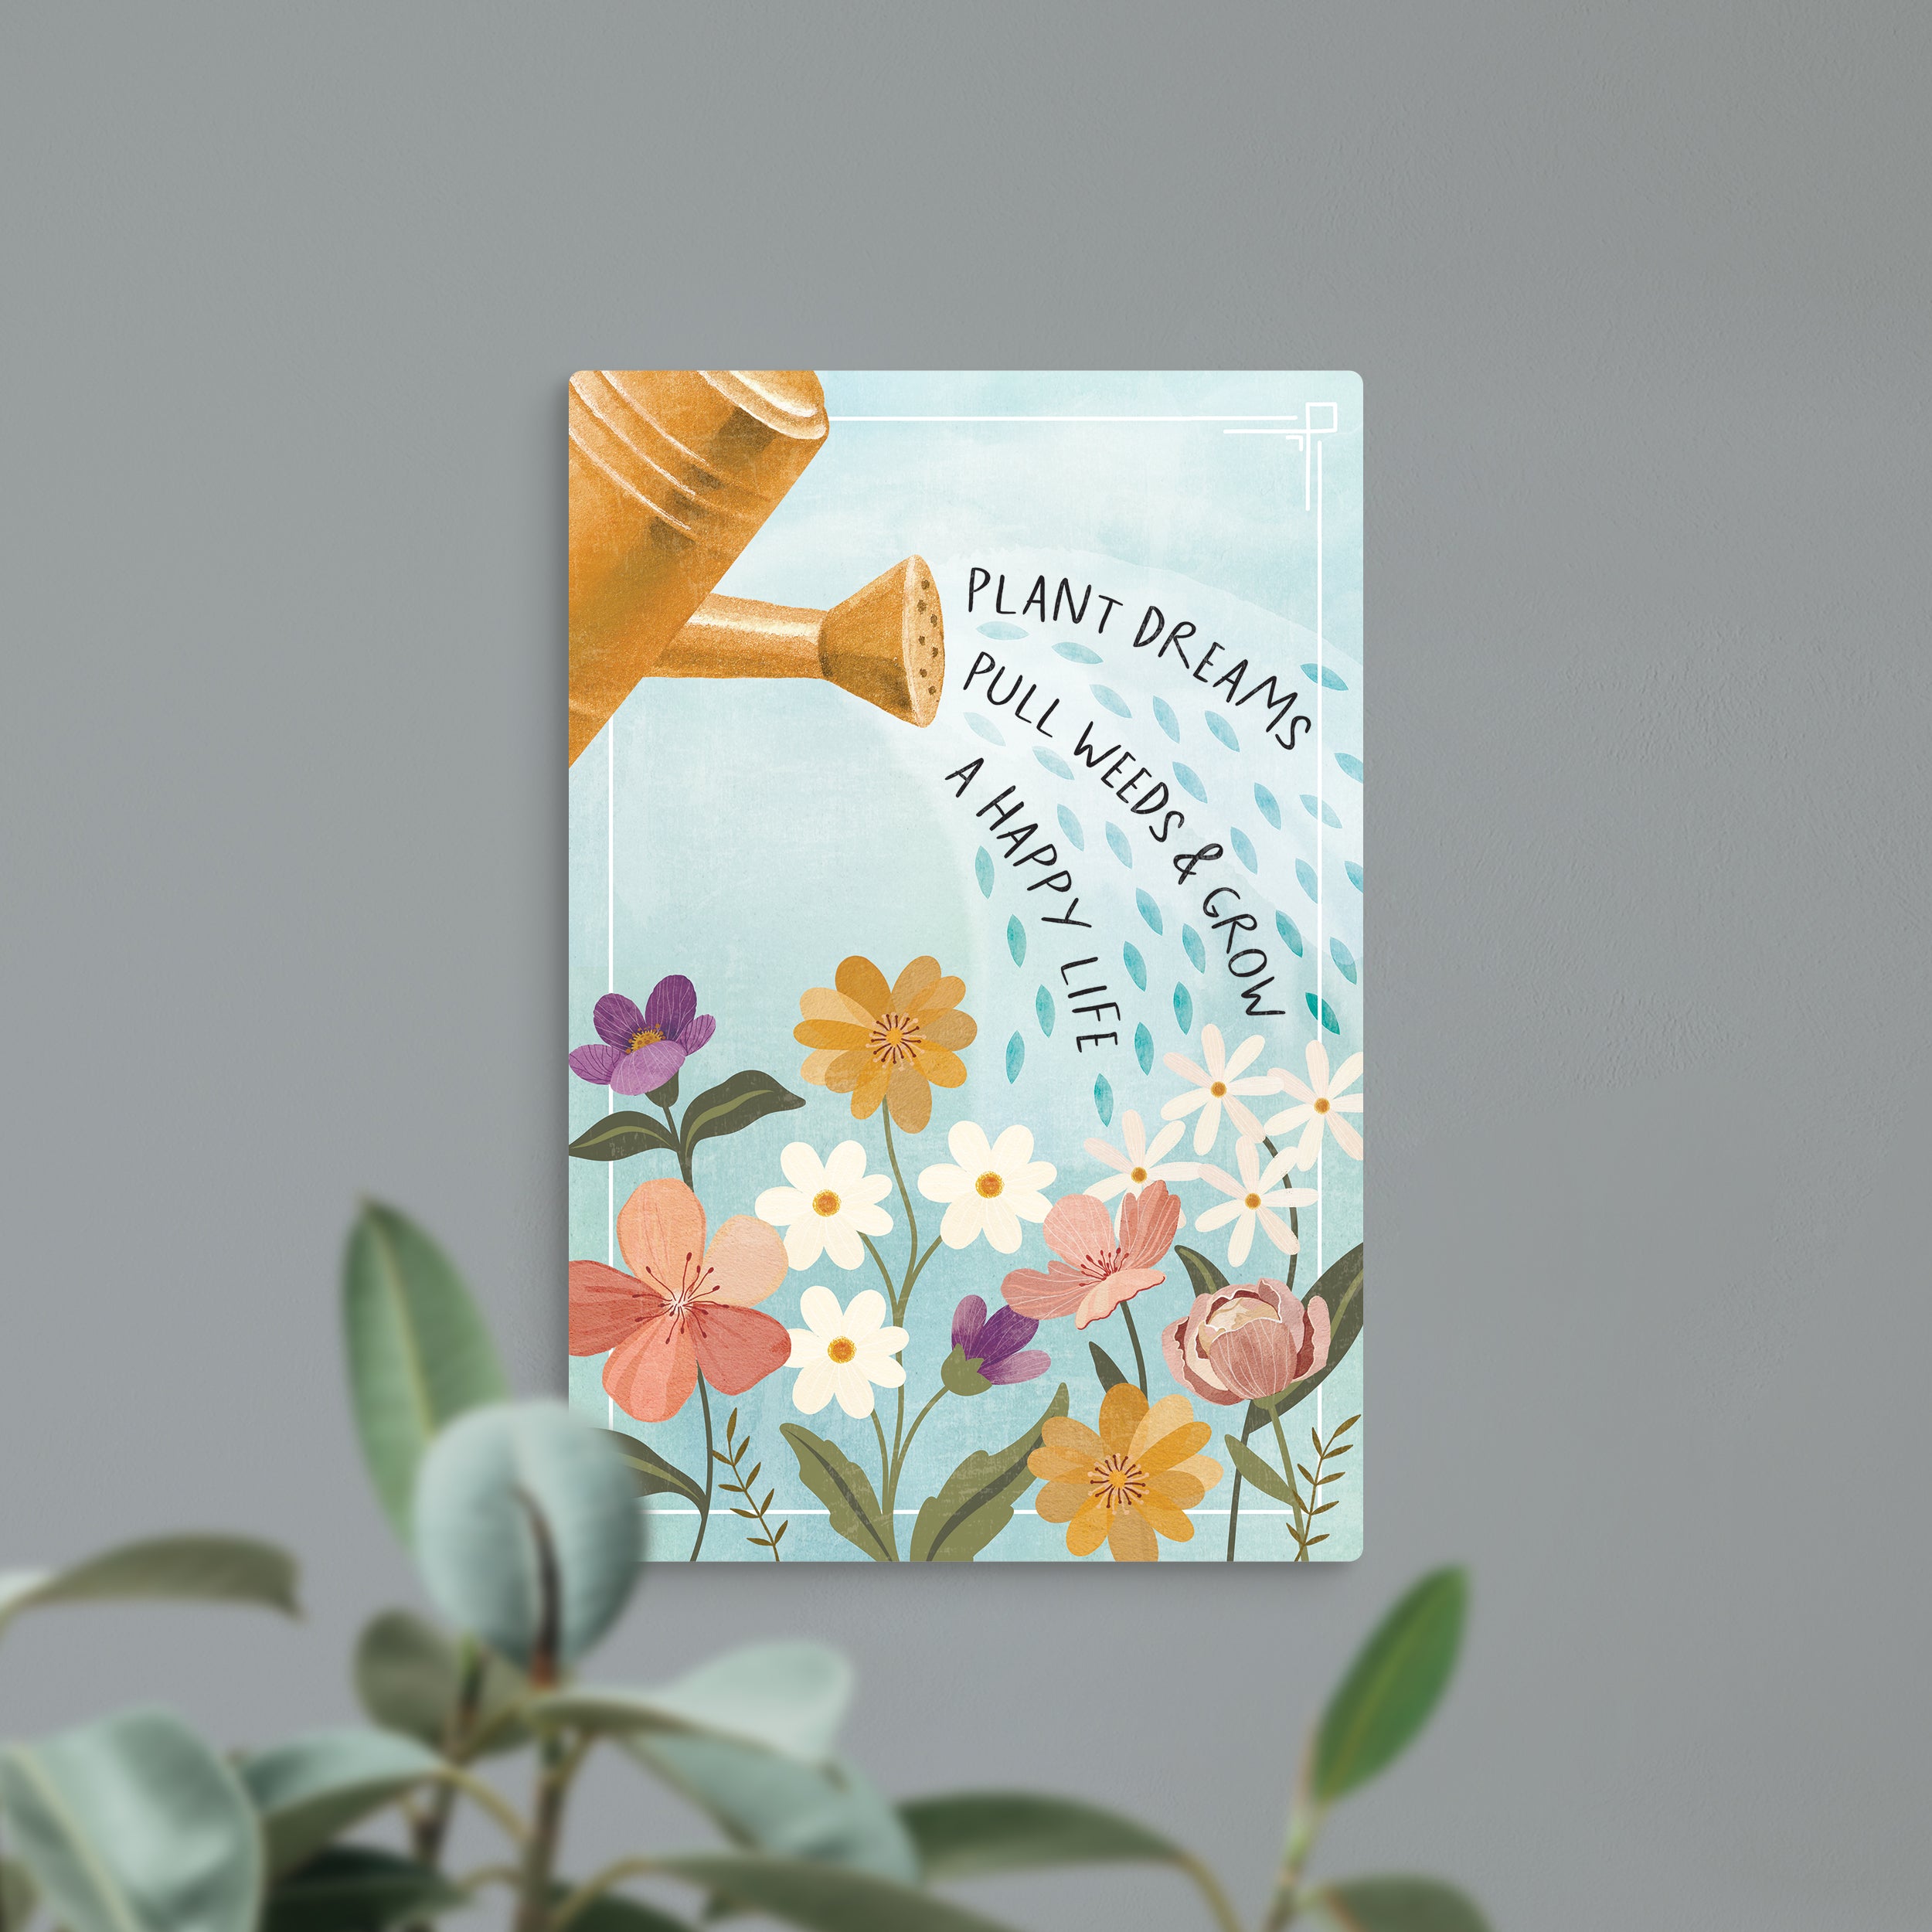 Plant Dreams Pull Weeds And Grow A Happy Life Metal Sign